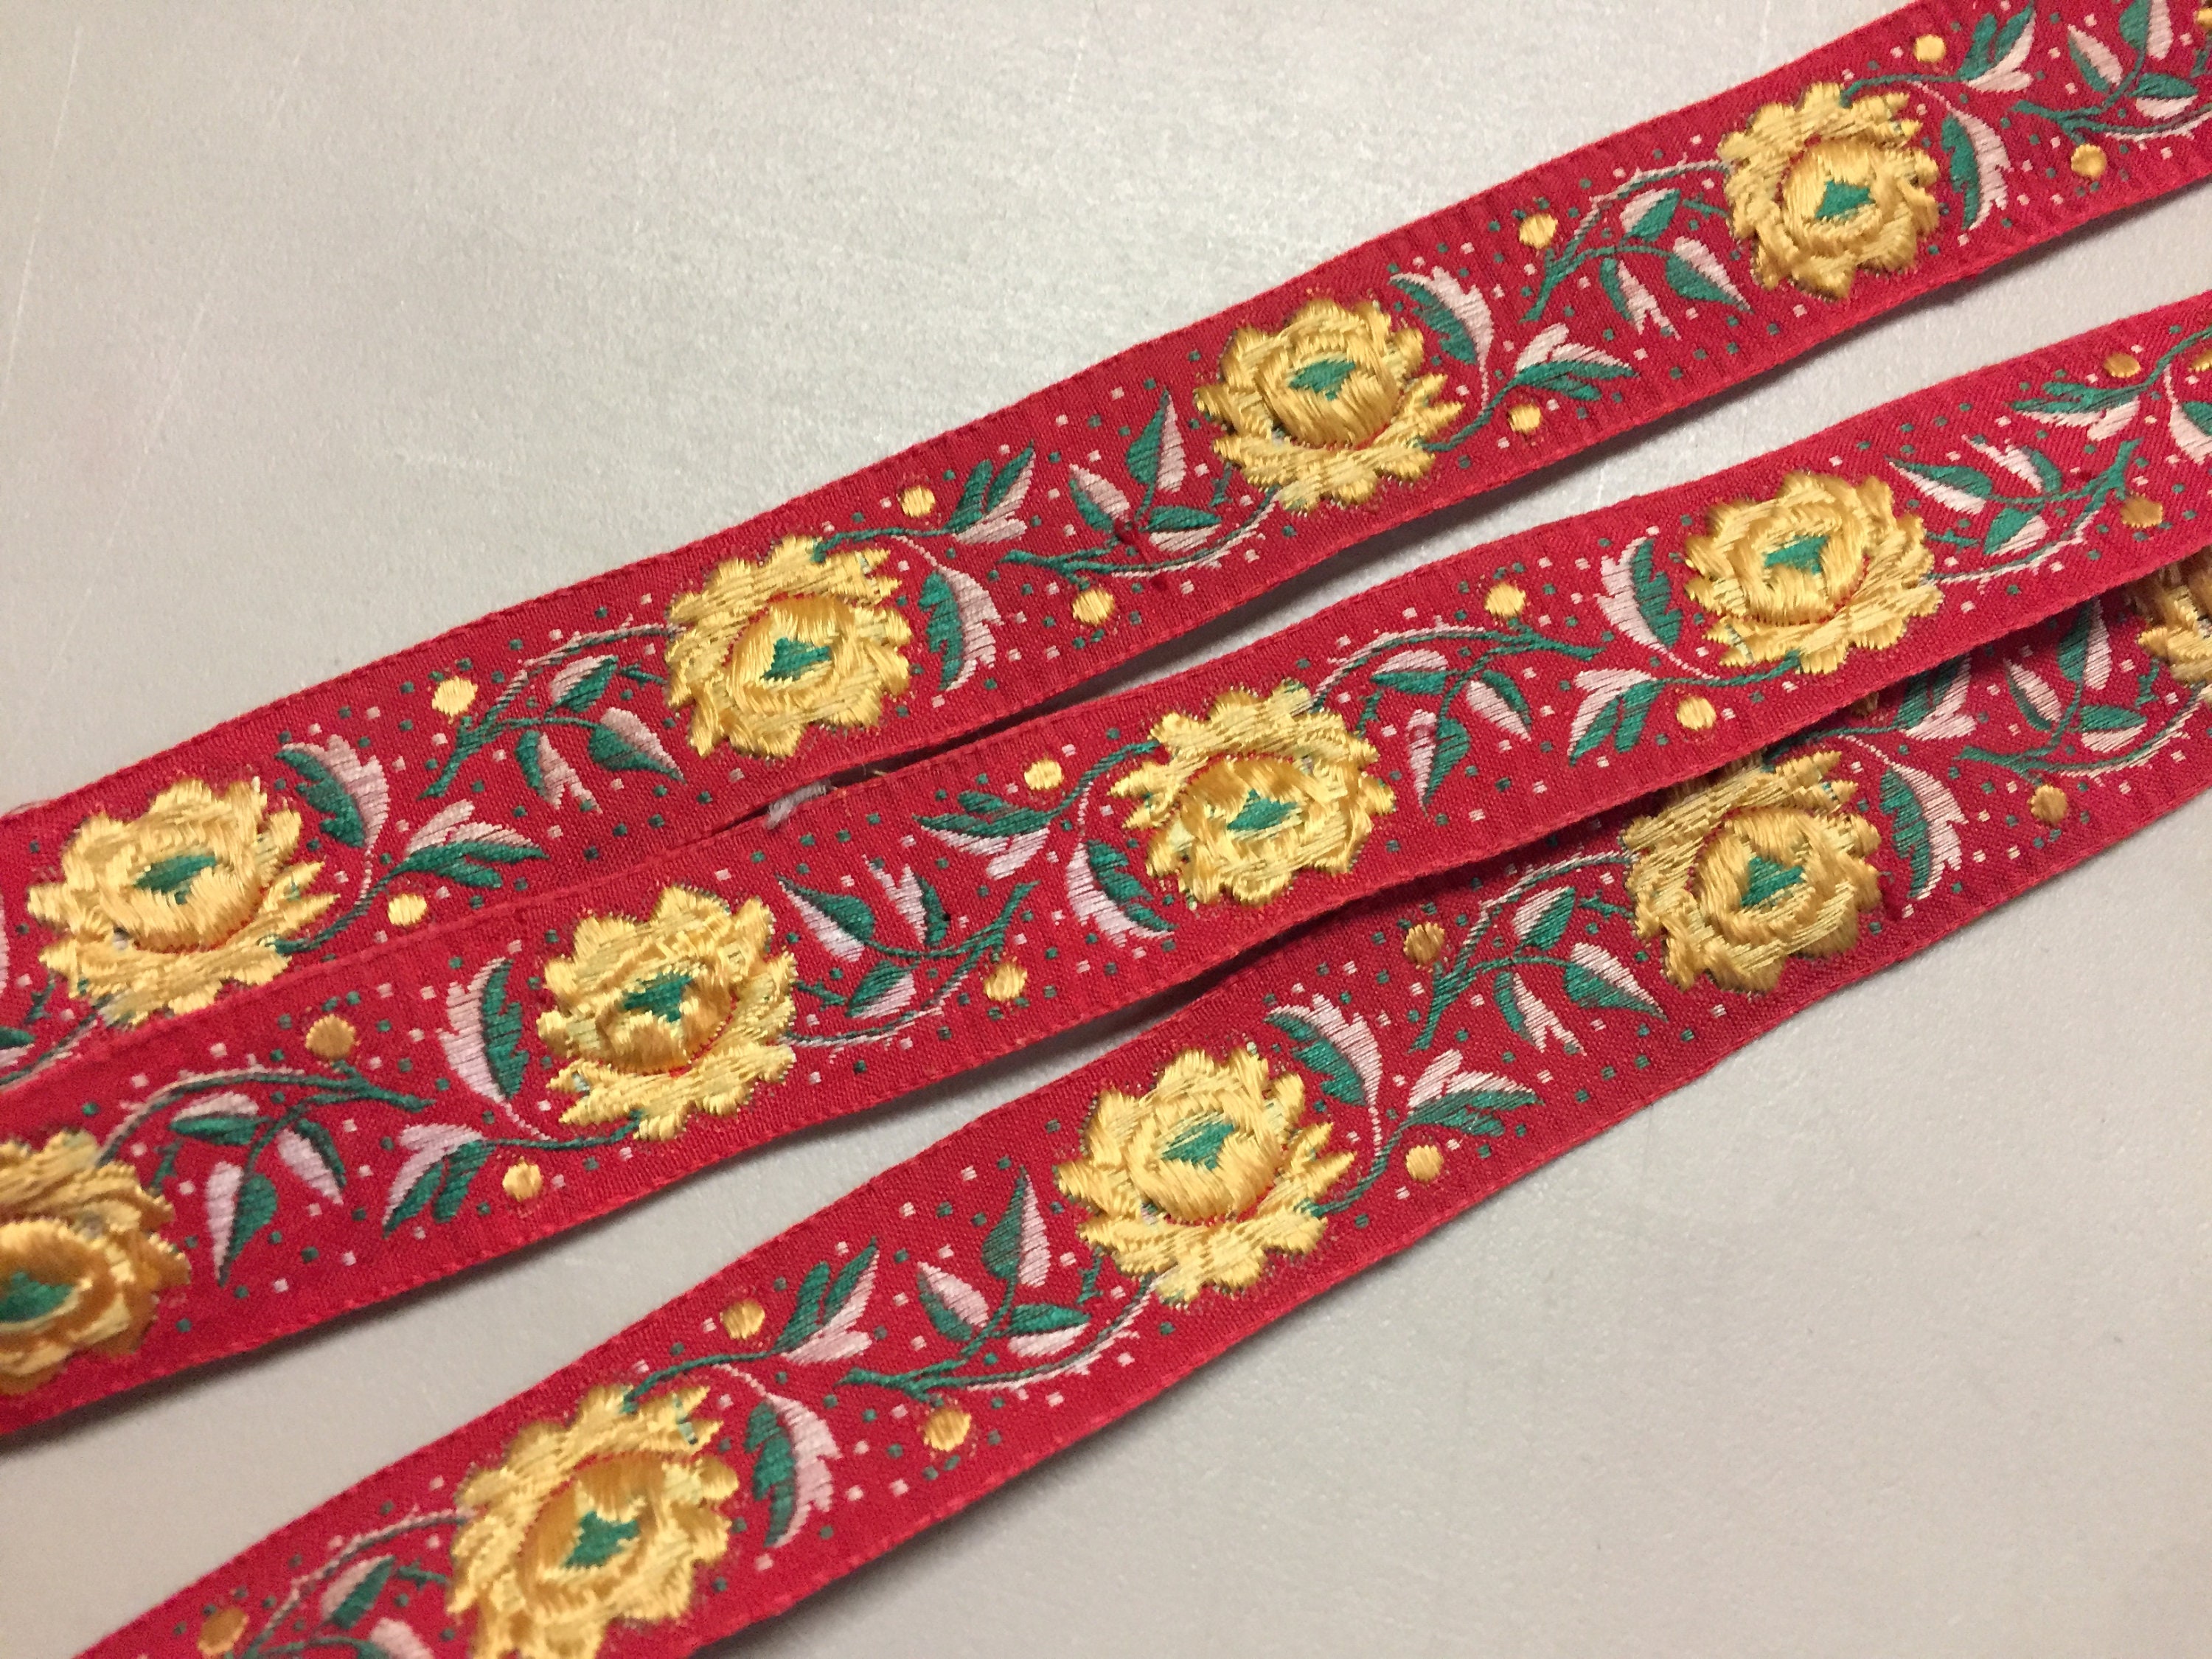 Vintage Floral Jacquard Ribbon Deep Red With Yellow With | Etsy